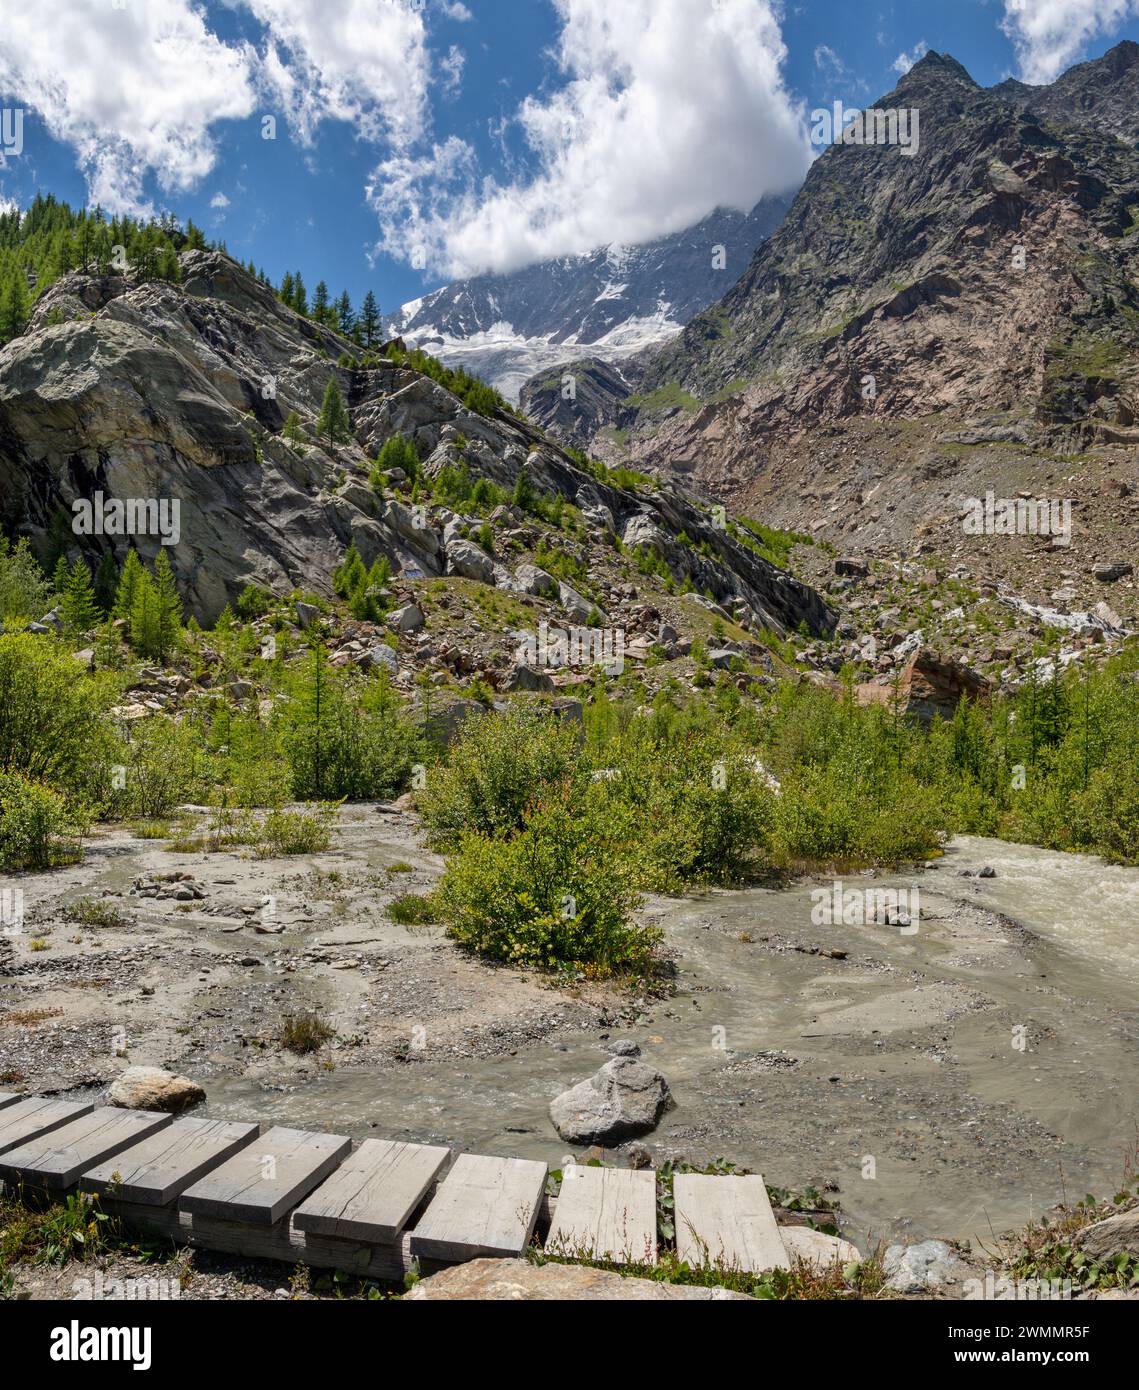 The glacial watercourse and stream under Dom peak - Sas Fee. Stock Photo